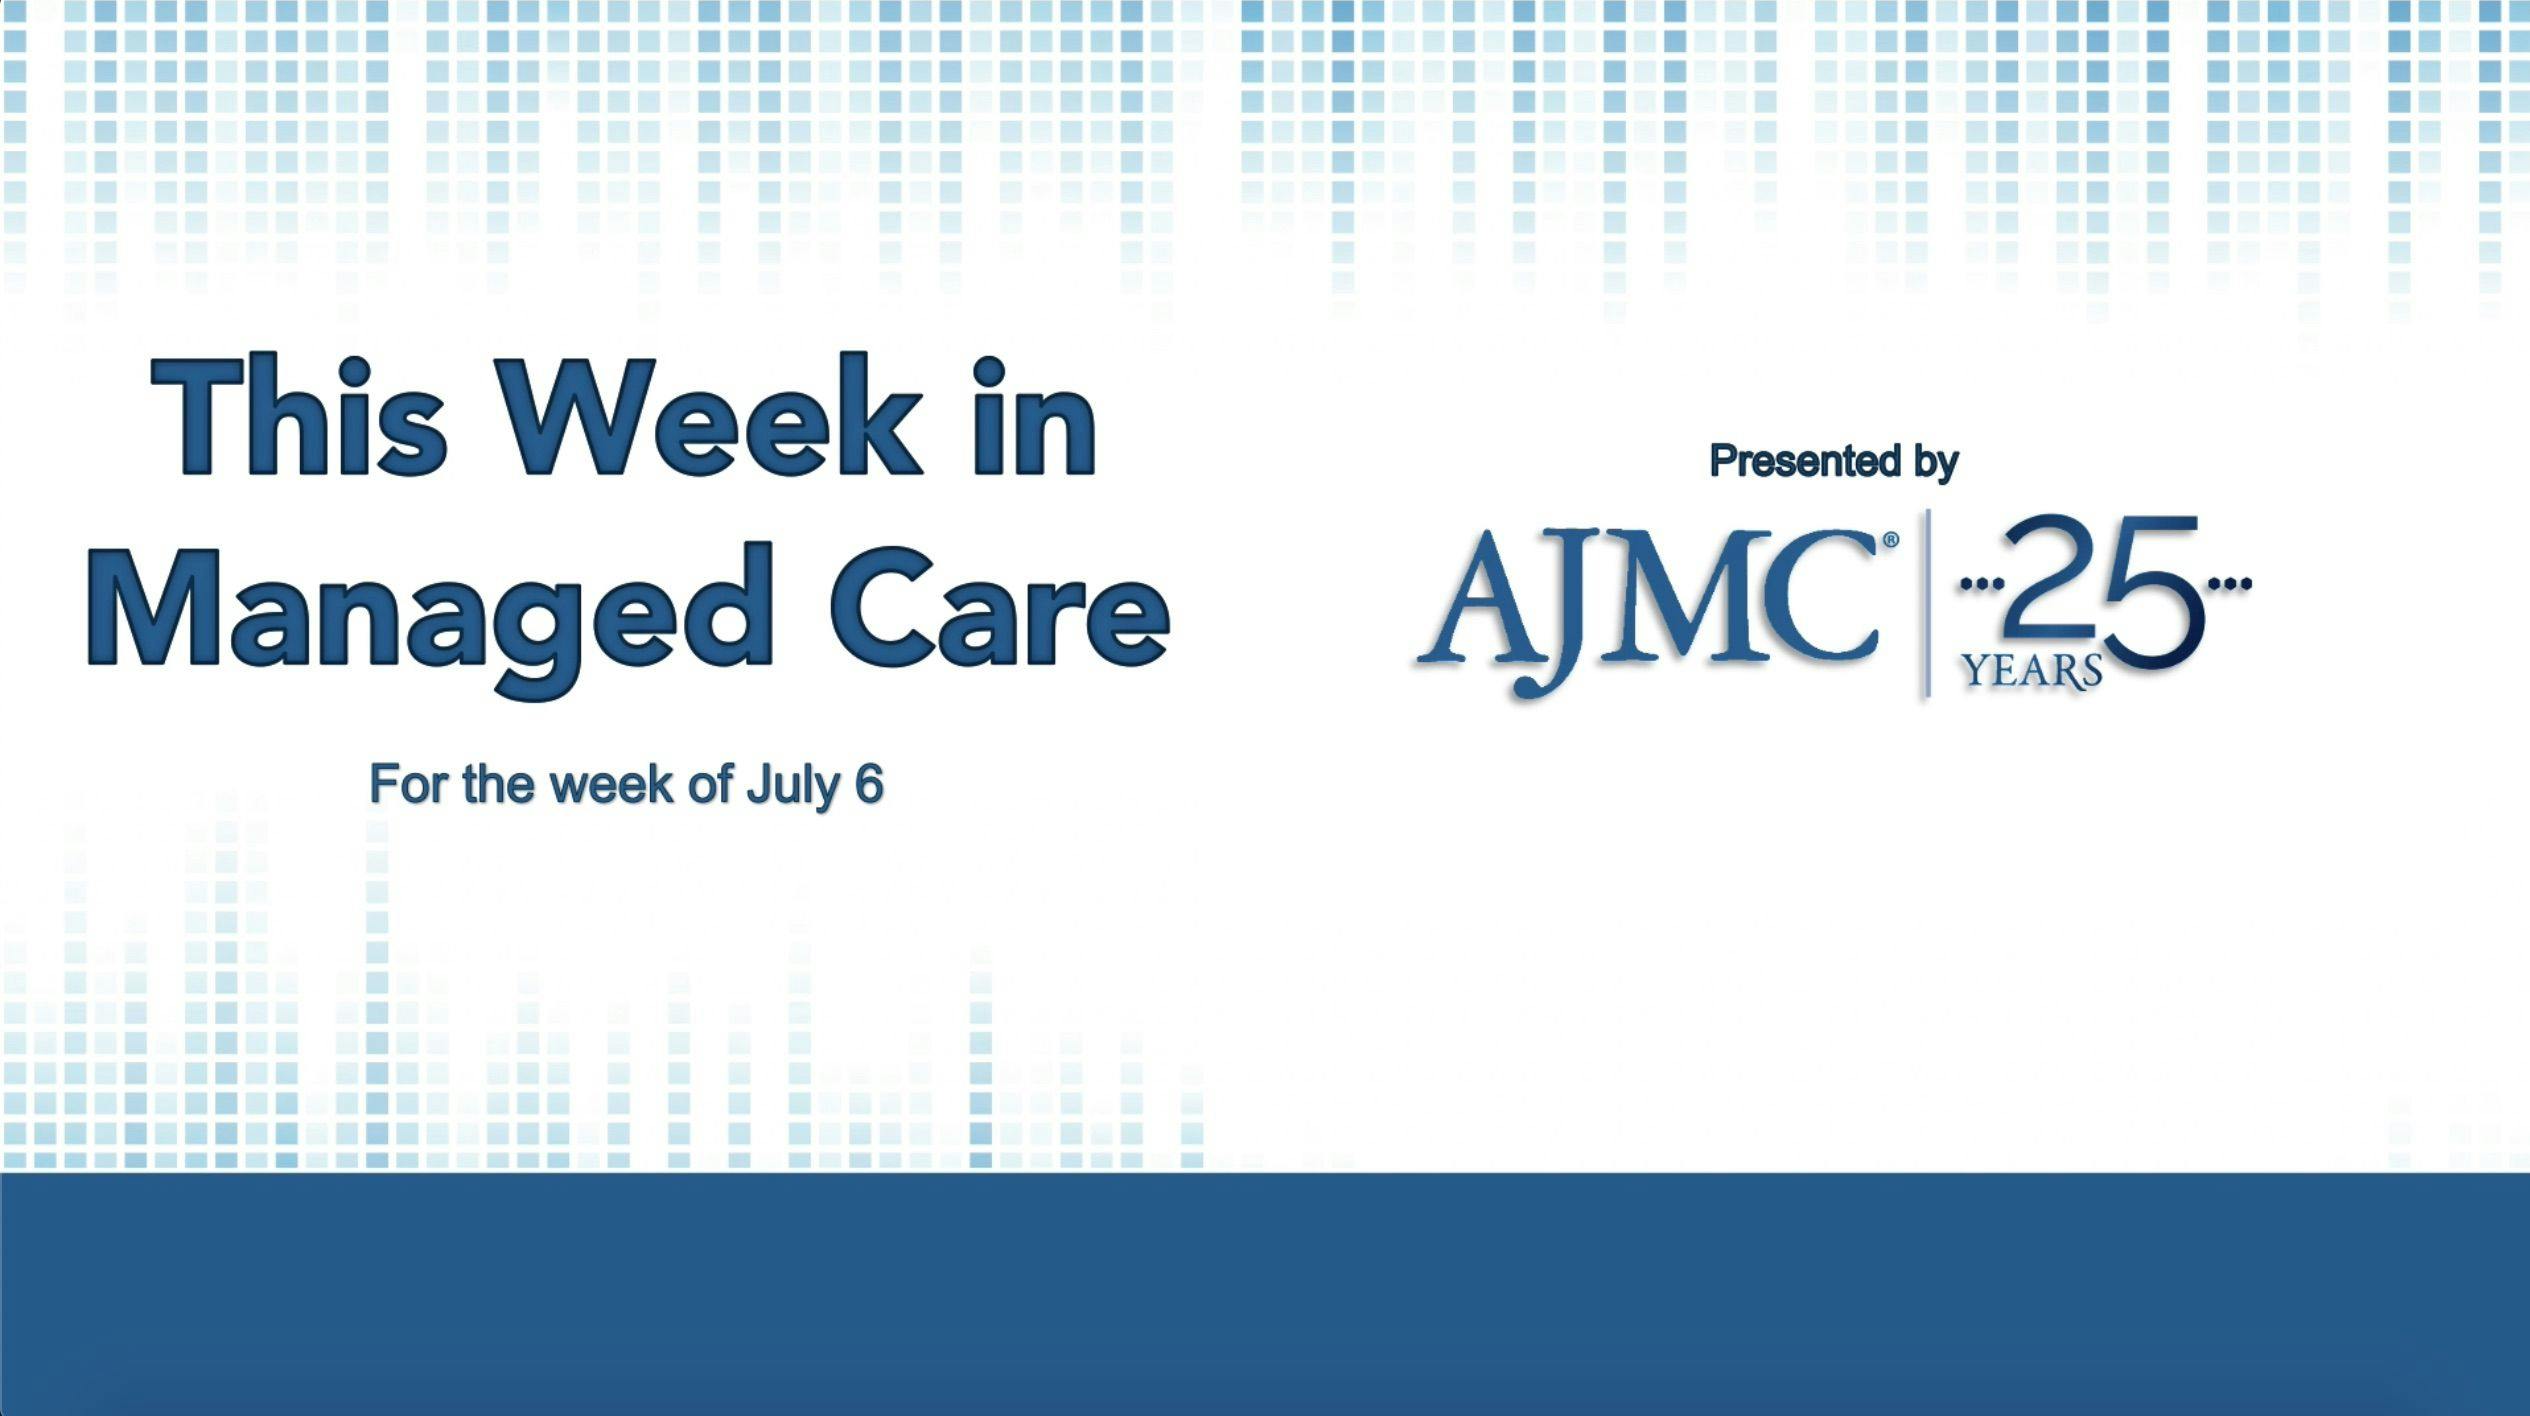 This Week in Managed Care: July 10, 2020